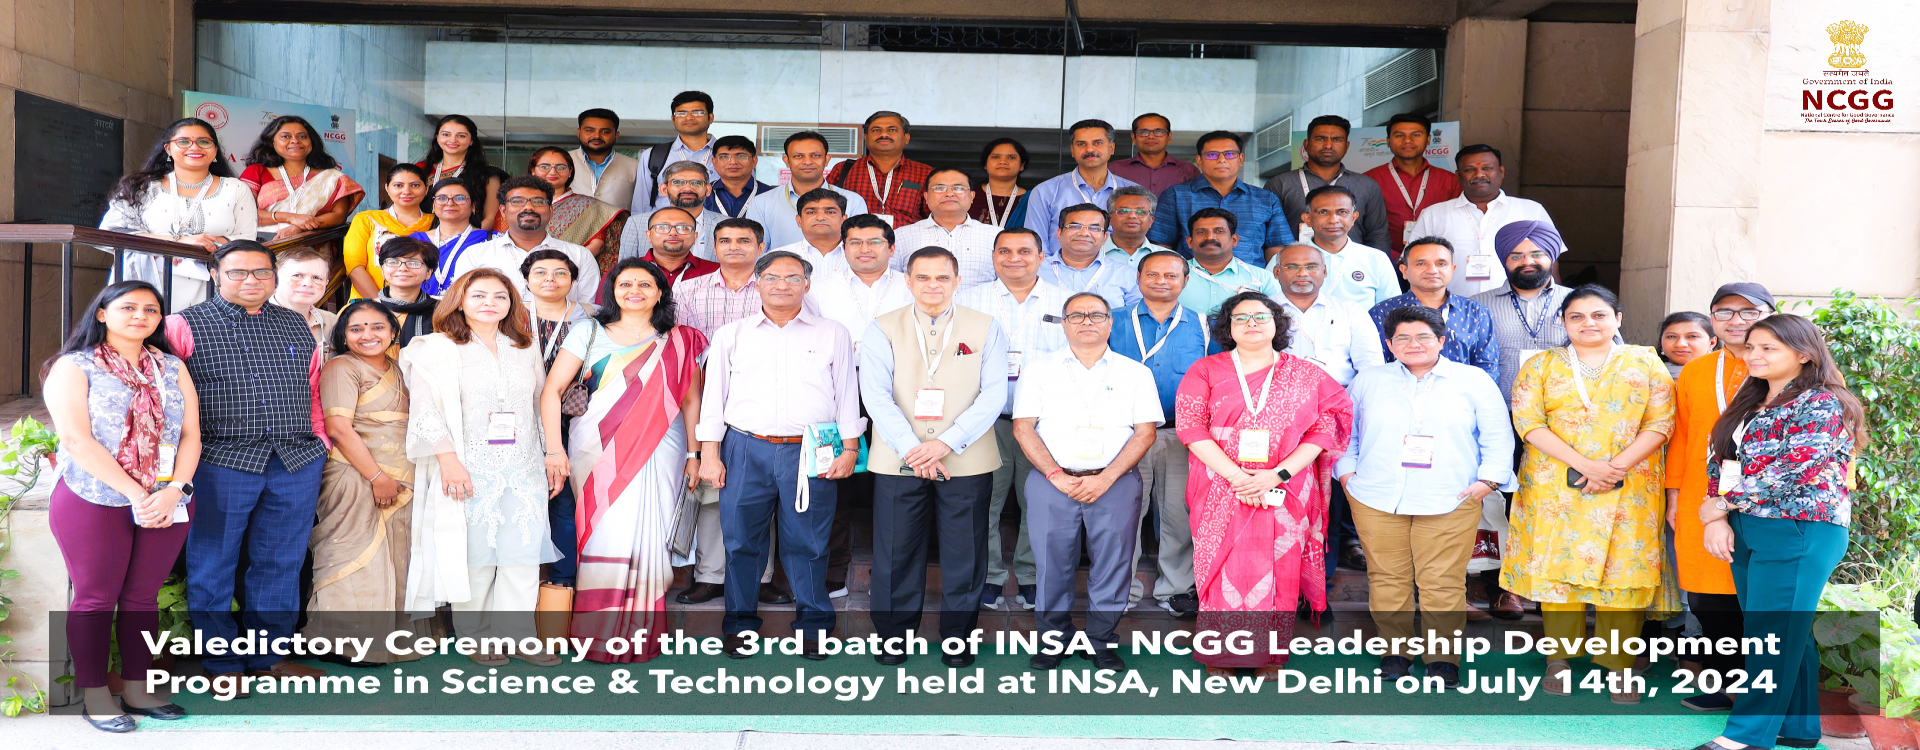 Valedictory Ceremony of the 3rd batch of INSA - NCGG LEADS Programme held at INSA, New Delhi on July 14th 2024